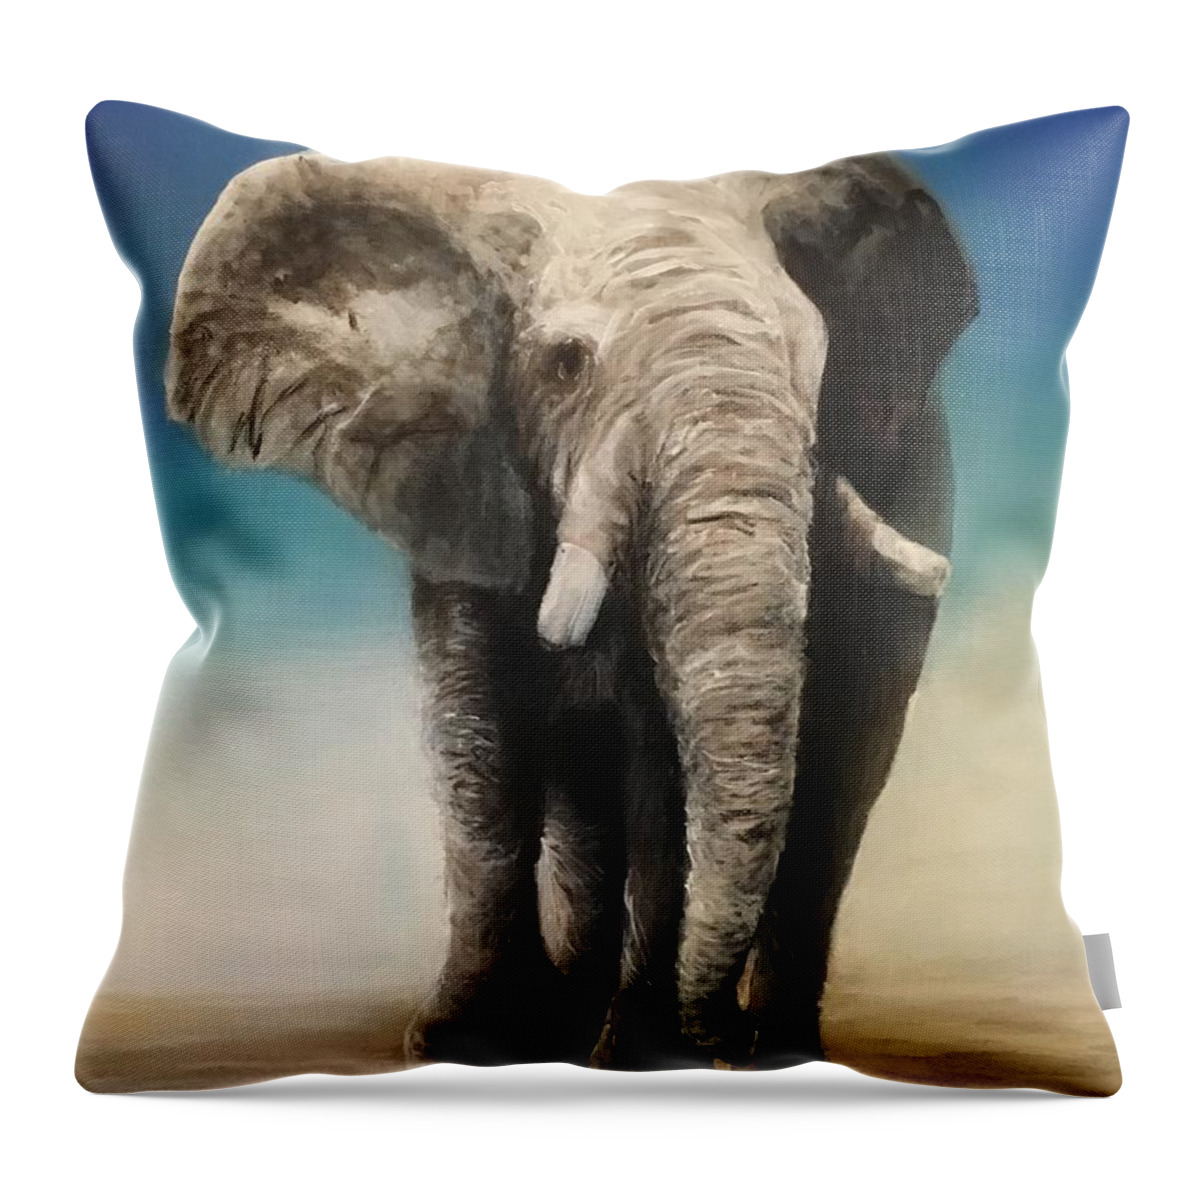 Bull Elephant On Dry Landscape Throw Pillow featuring the painting Bull 4 by Joe Bracco